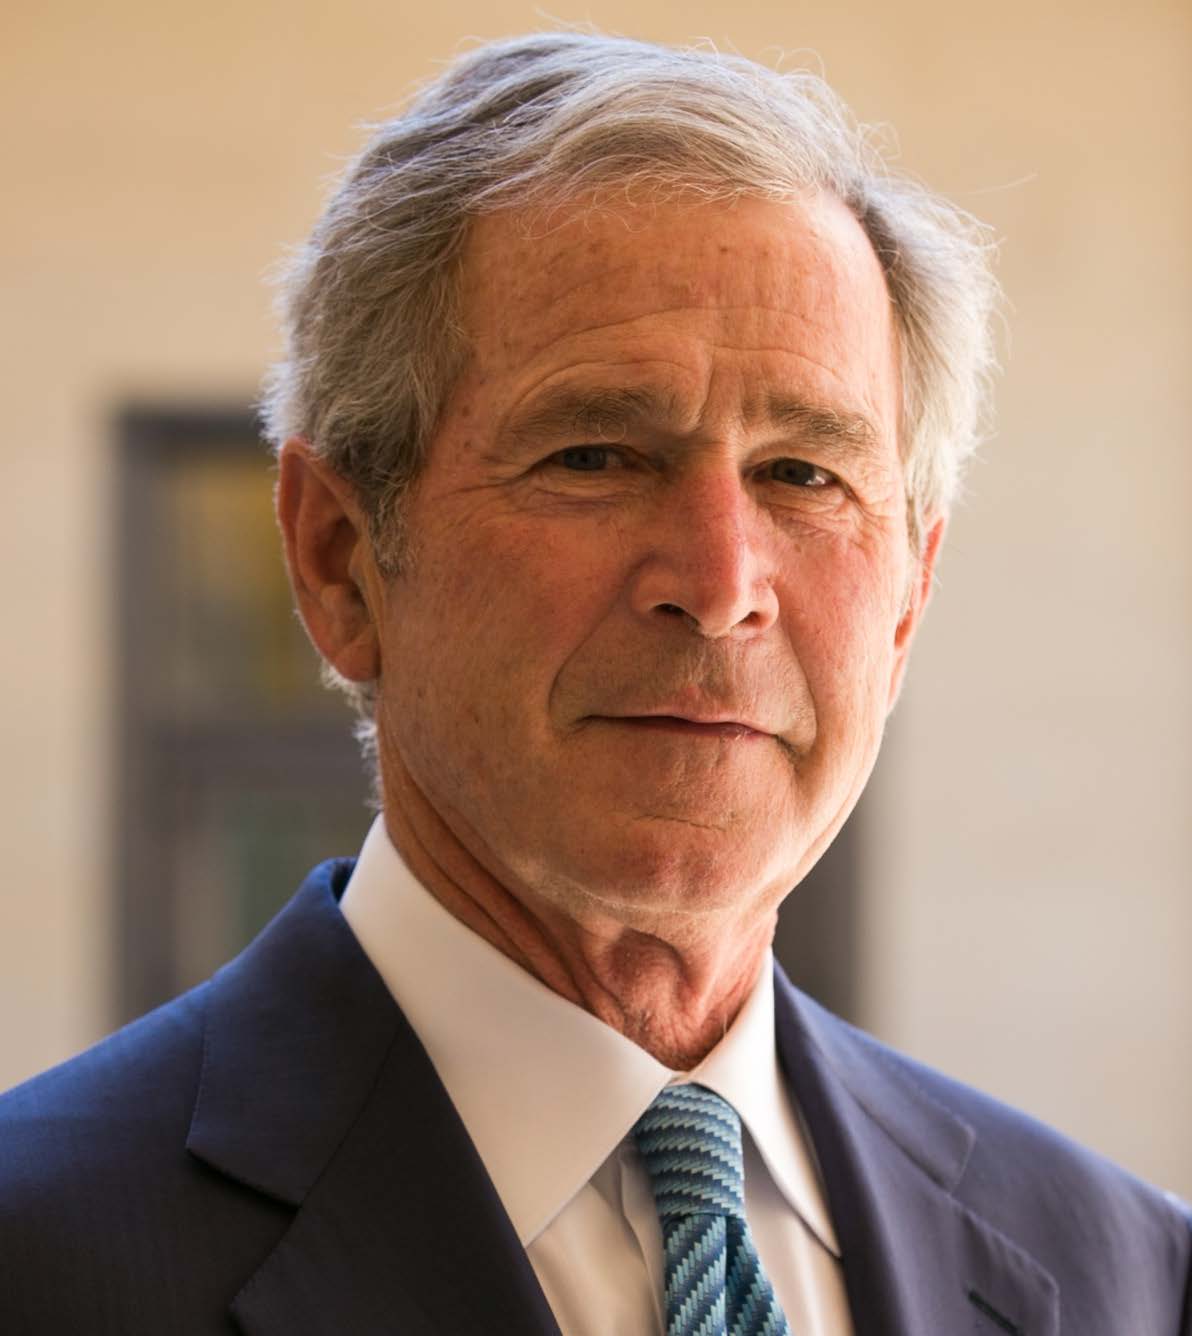 An Exclusive Conversation with President George W. Bush